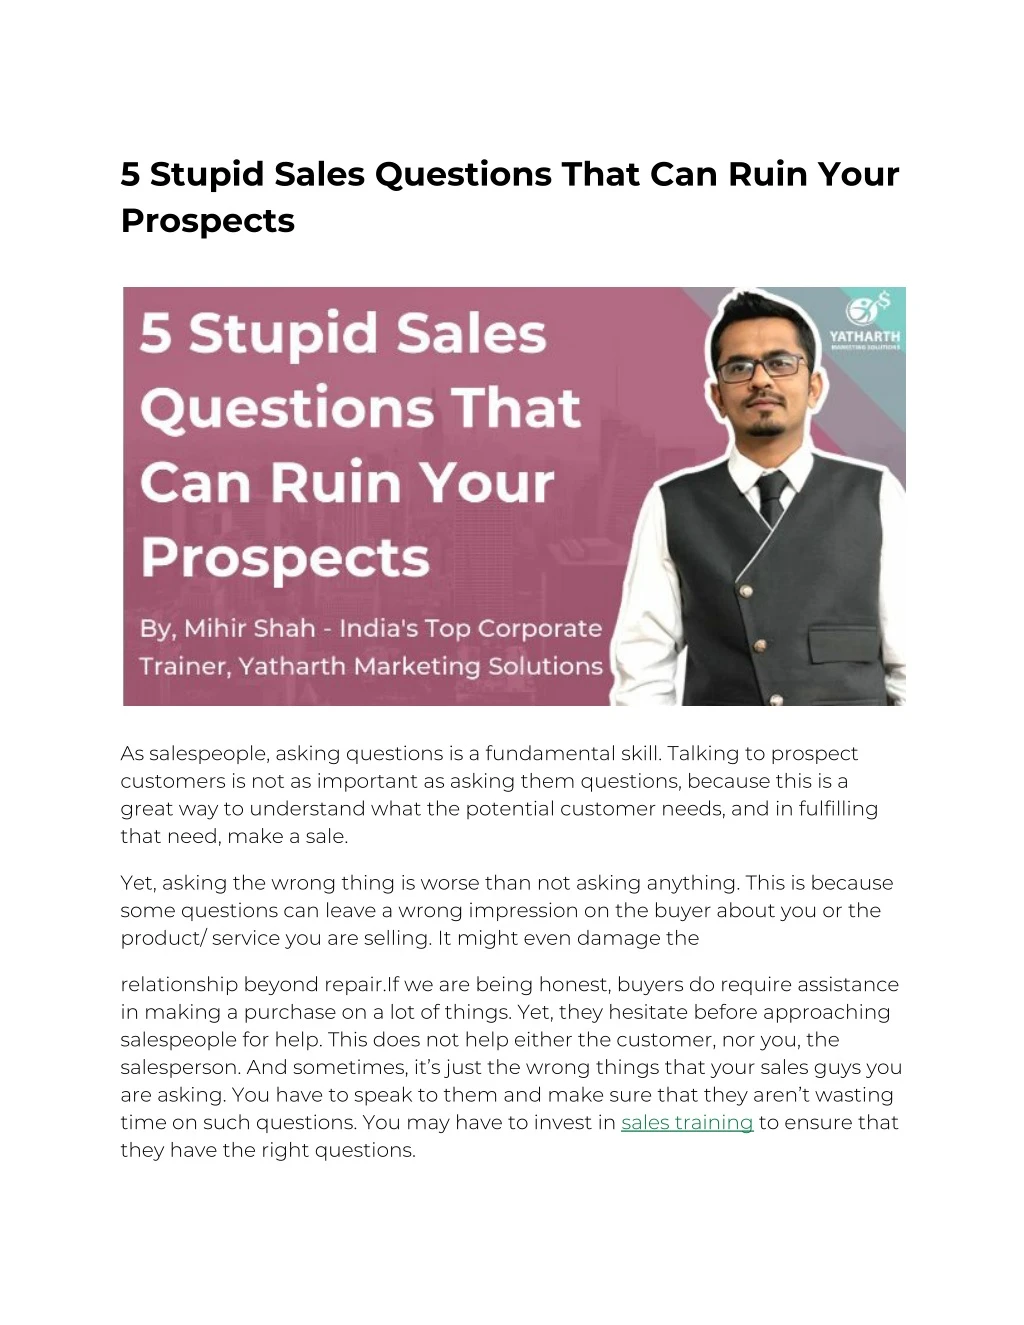 5 stupid sales questions that can ruin your